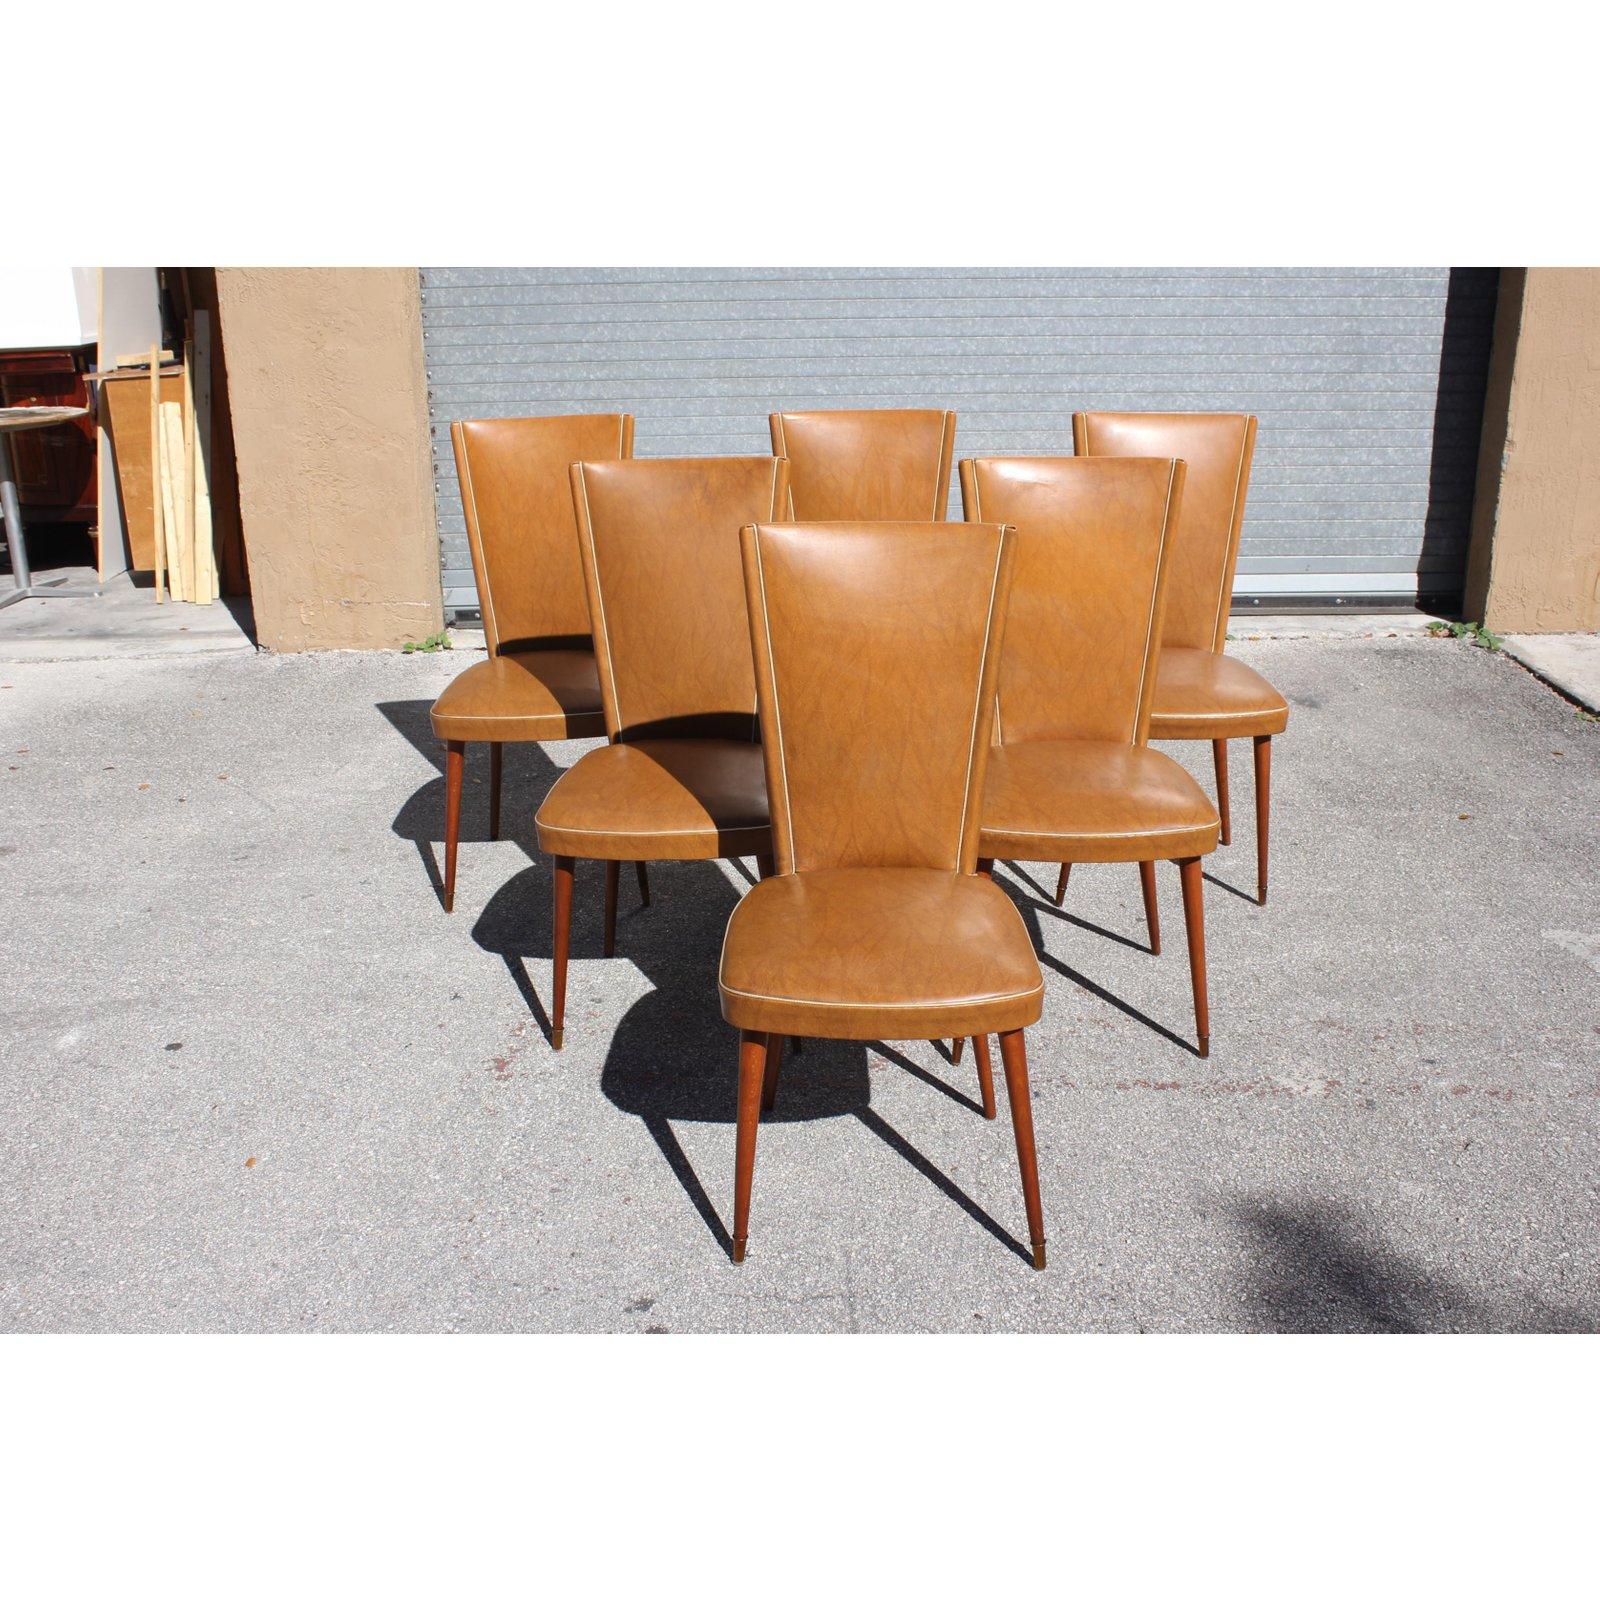 Set of six French Art Deco dining chairs solid mahogany, the two front feet are capped with brass. The chair frames are in very good condition. The reupholstery is vinyl recommended to be change for all 6 dining chairs but the color of the dining